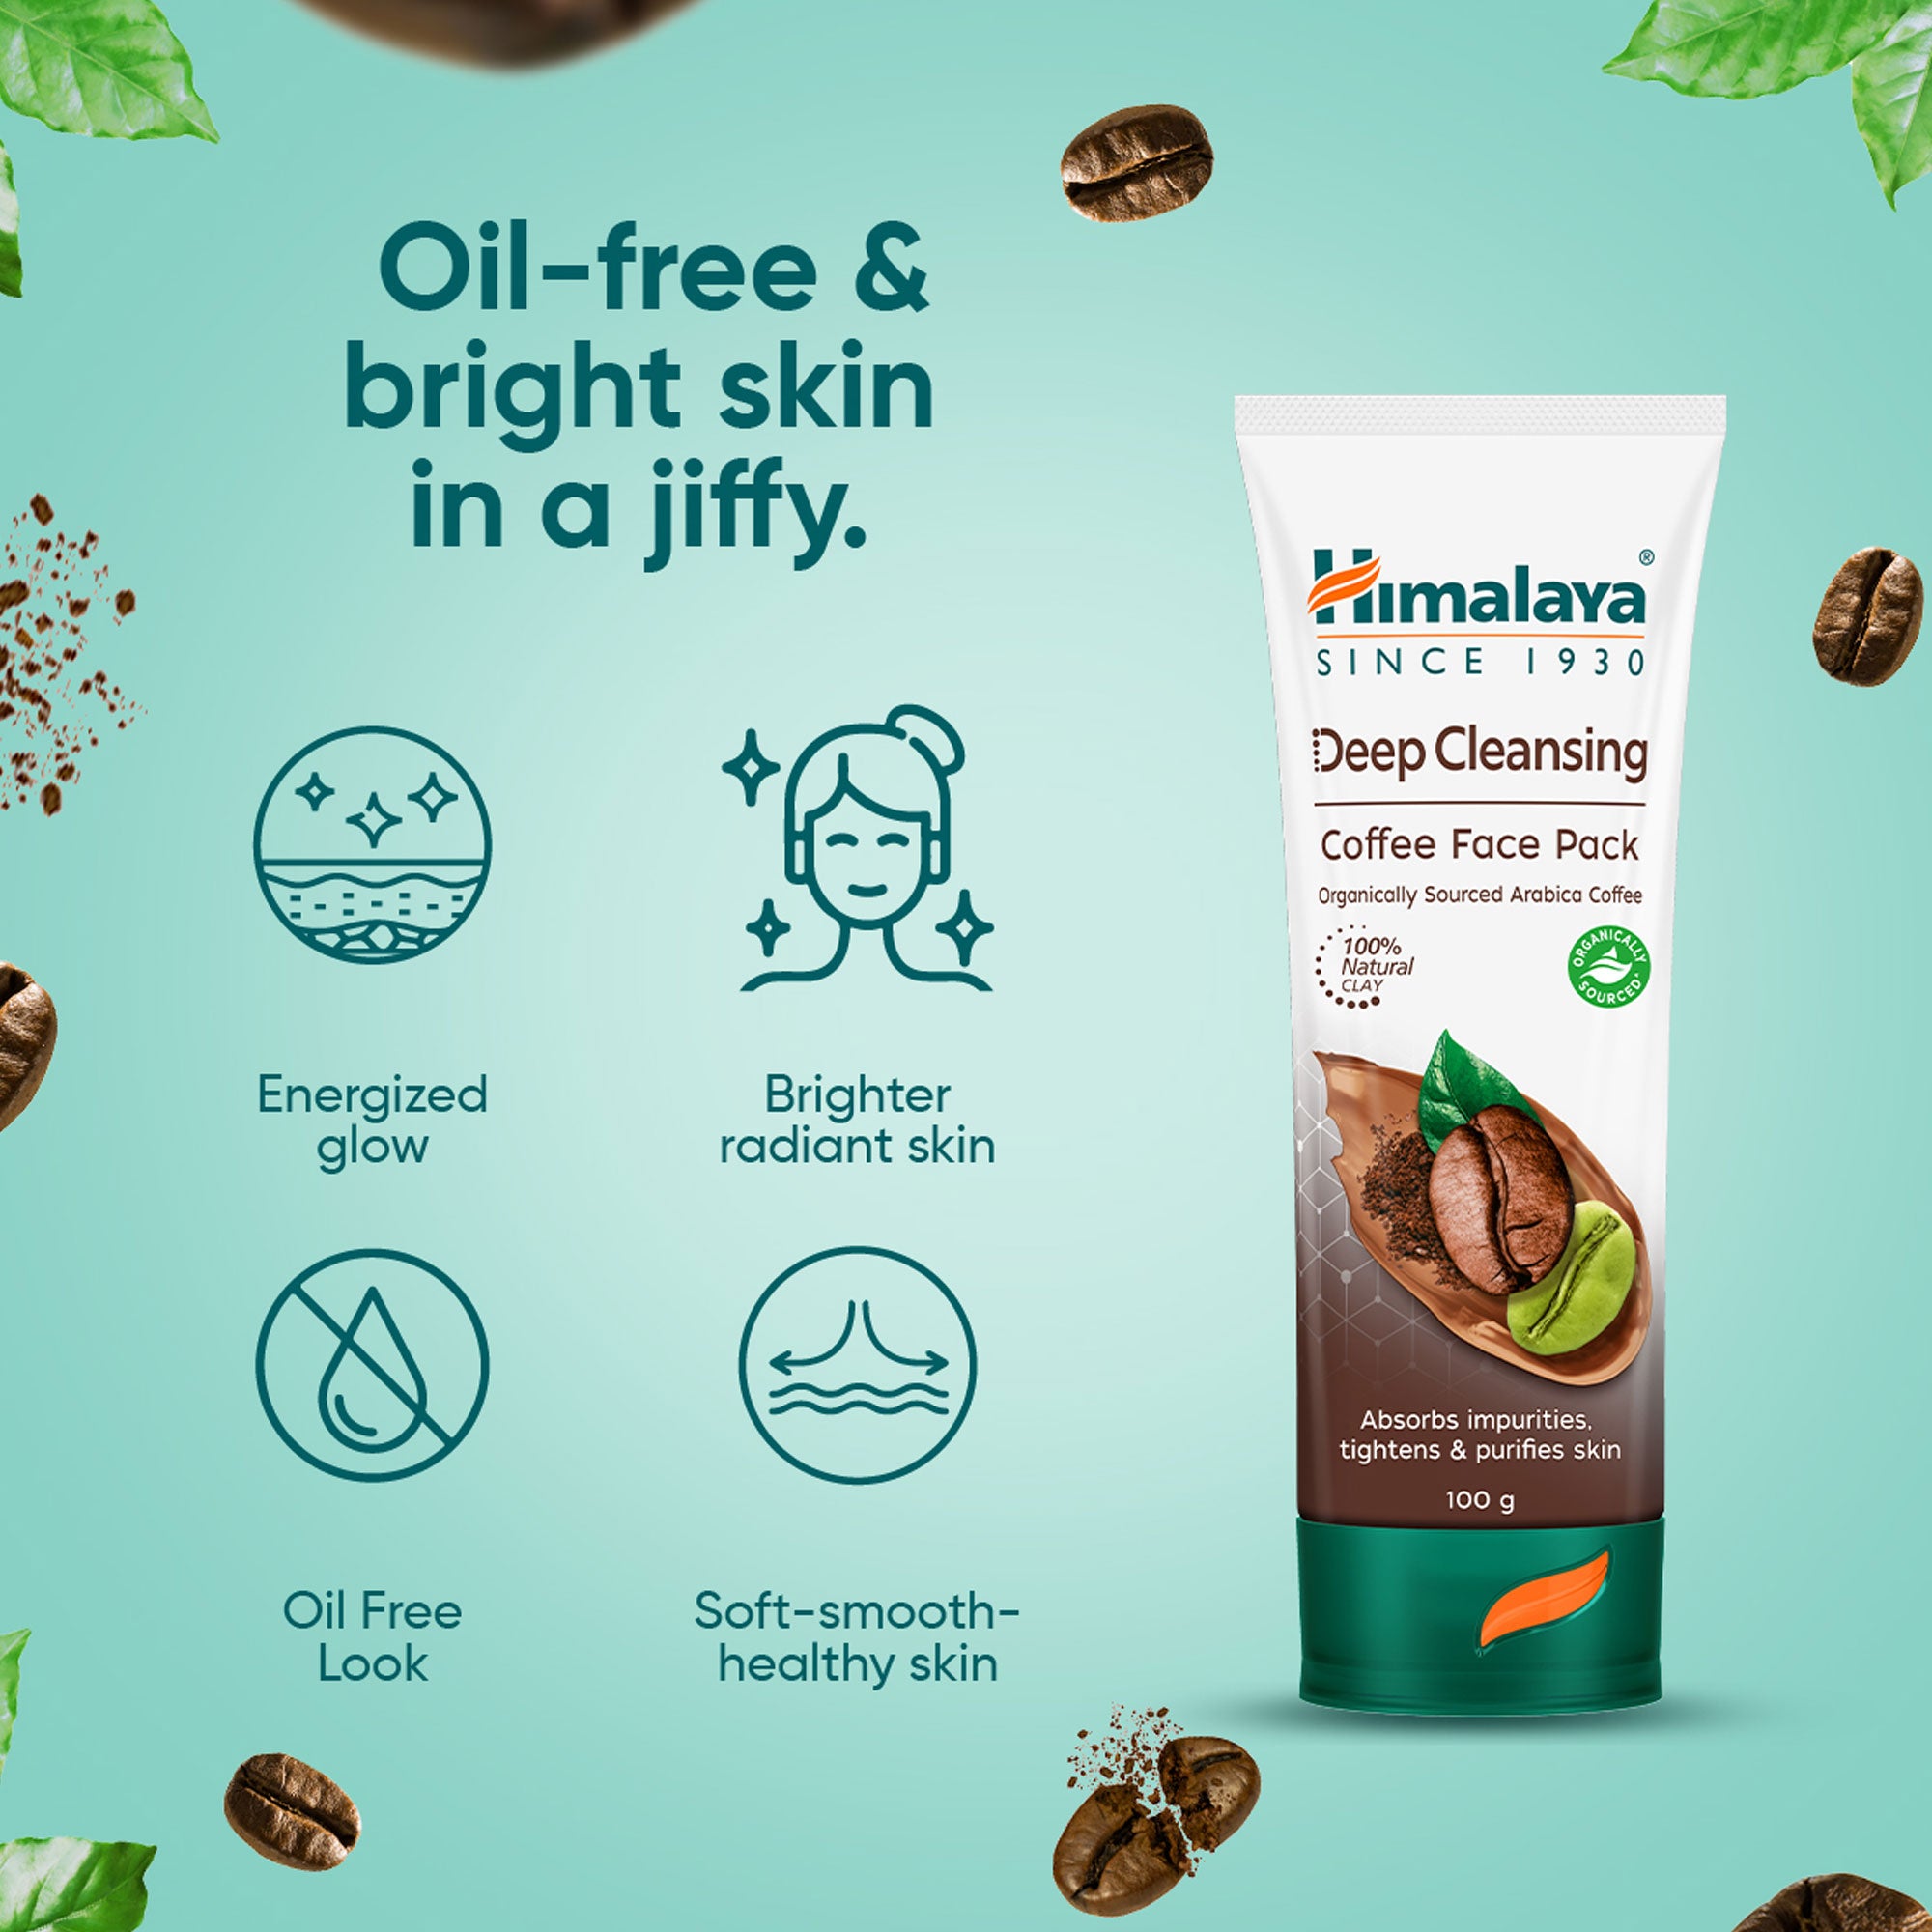 Himalaya Deep Cleansing Coffee Face Pack 100g Benefits